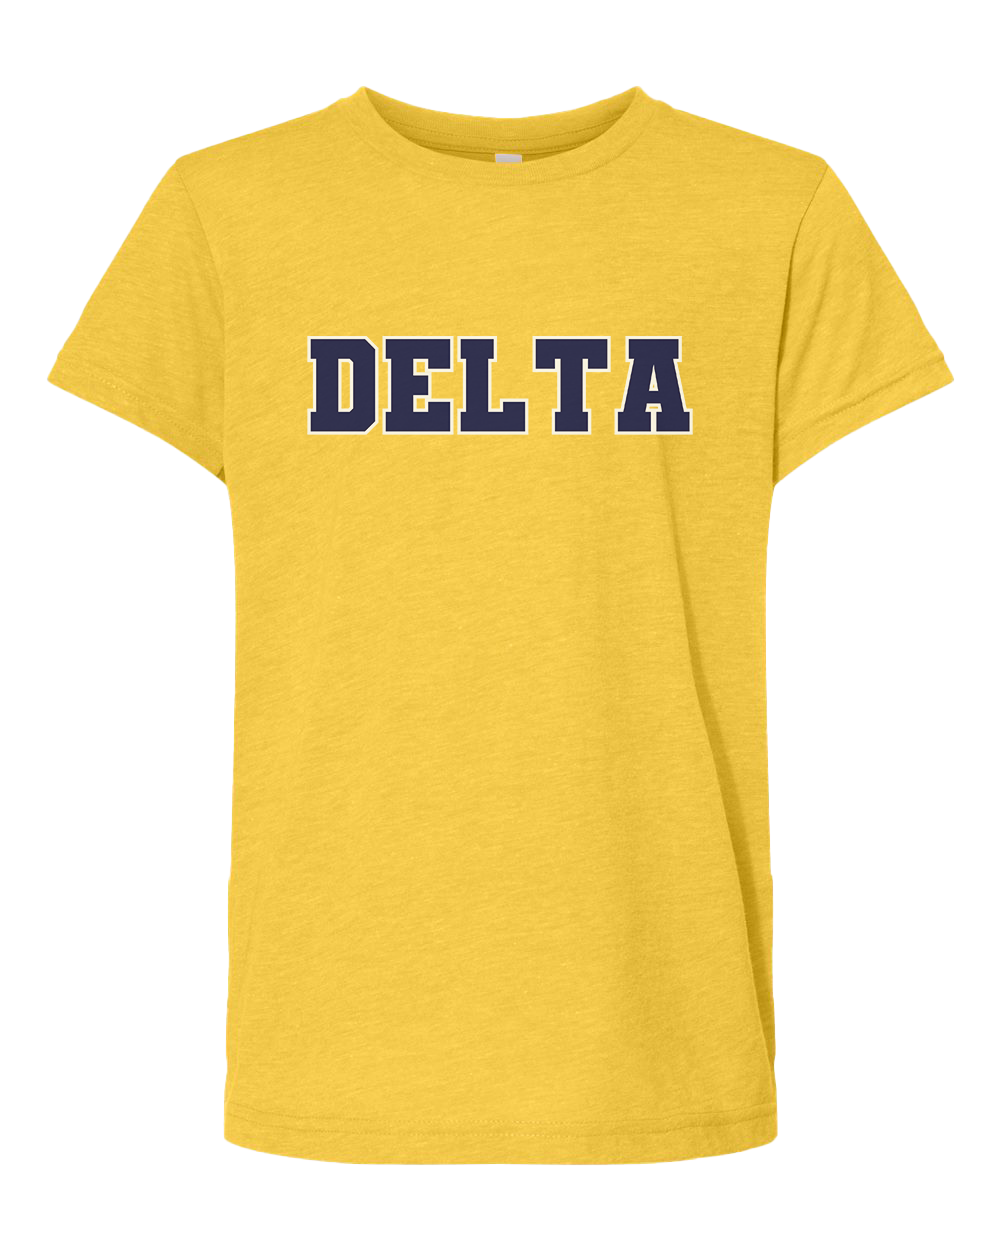 Delta Eagles Youth Triblend Tshirt - Yellow